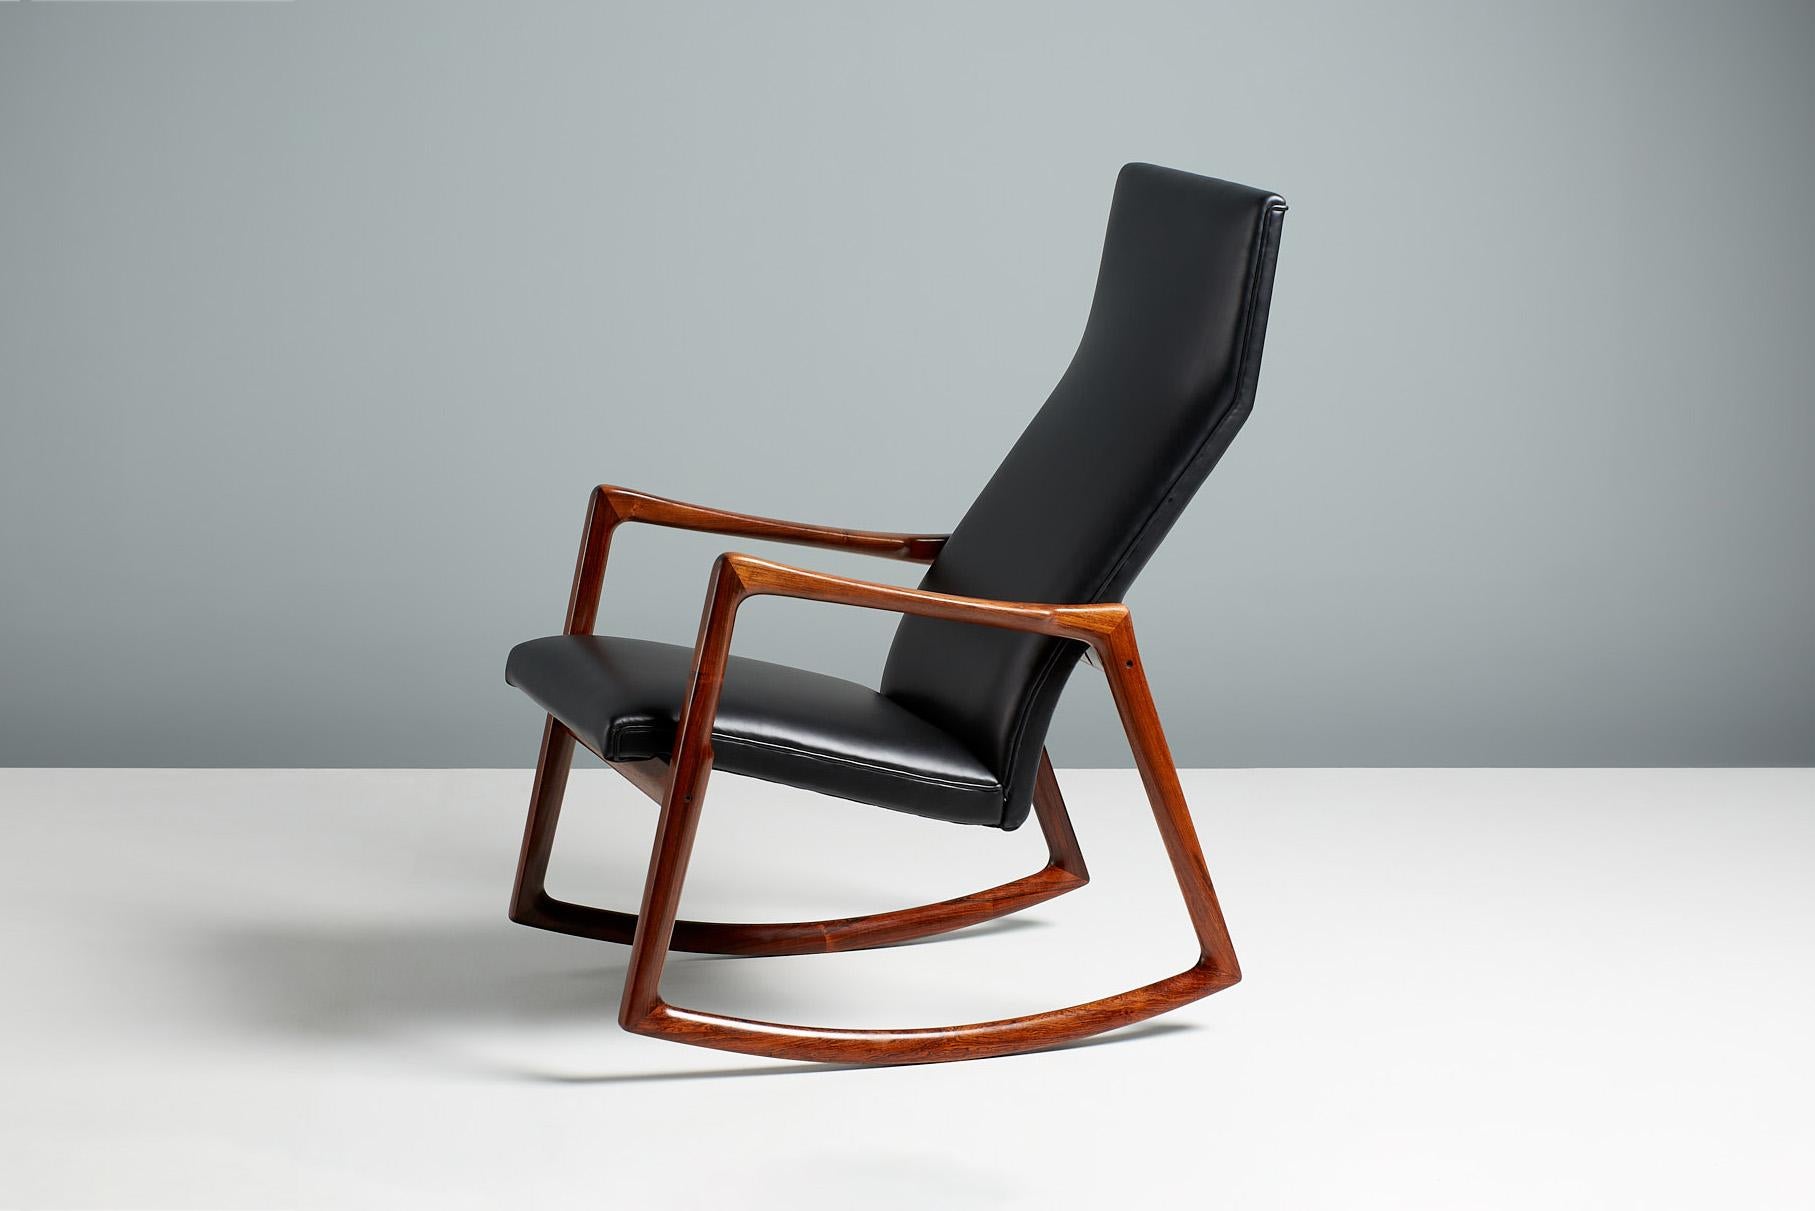 Helge Vestergaard-Jensen rosewood rocking chair, c1960s.

Stunning sculptural, modernist rocking chair attributed to Danish master Helge Vestergaard-Jensen and supposedly produced by his long-time collaborator Peder Pedersen. 

This later